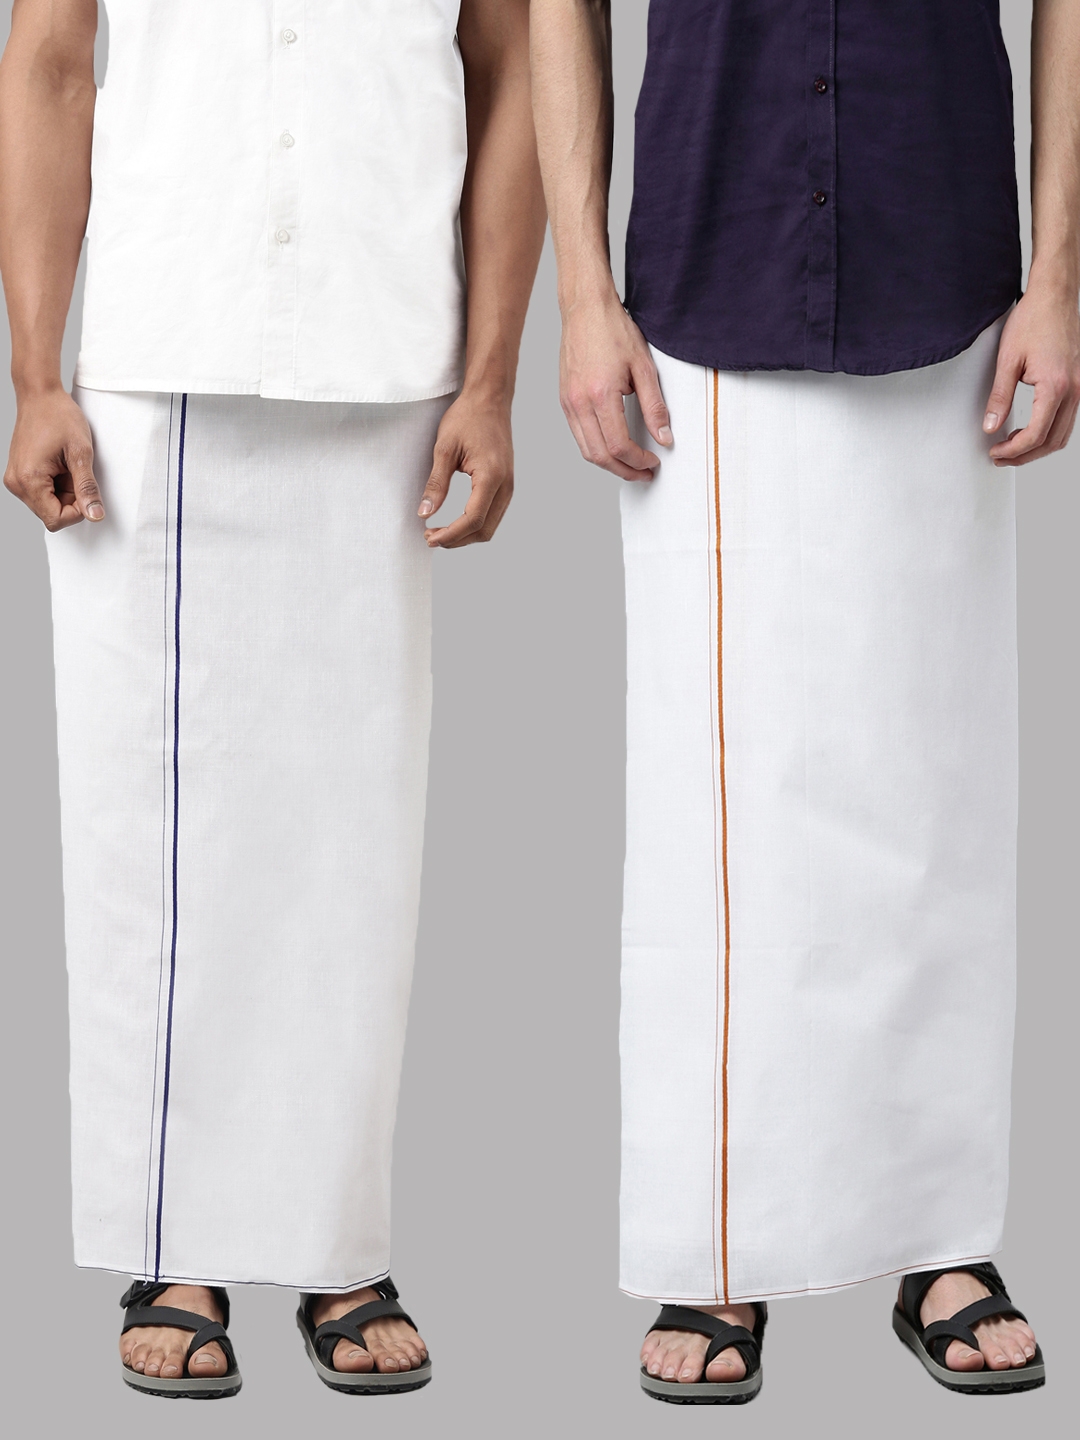 WHITE HEART | White Heart Mens 100% Cotton White Double and Small Border Dhoti - Pack of 2